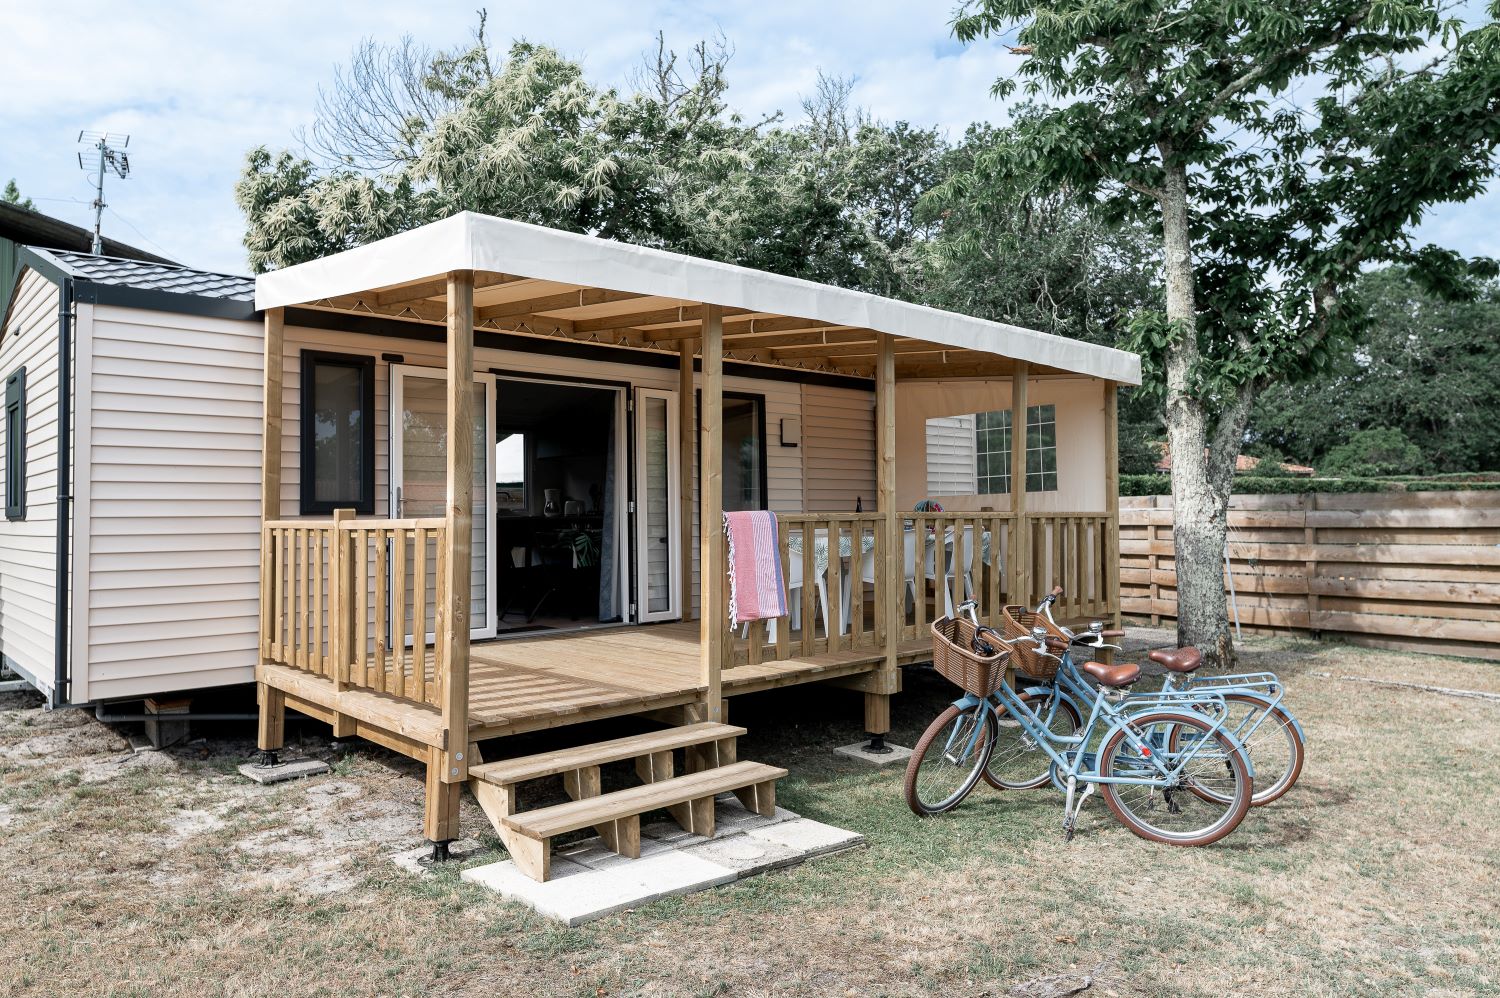 Location - Mobil Home Nirvana 3 Chambres Terrasse Bois Couverte 6Pers (D) - Camping Les Acacias, Messanges